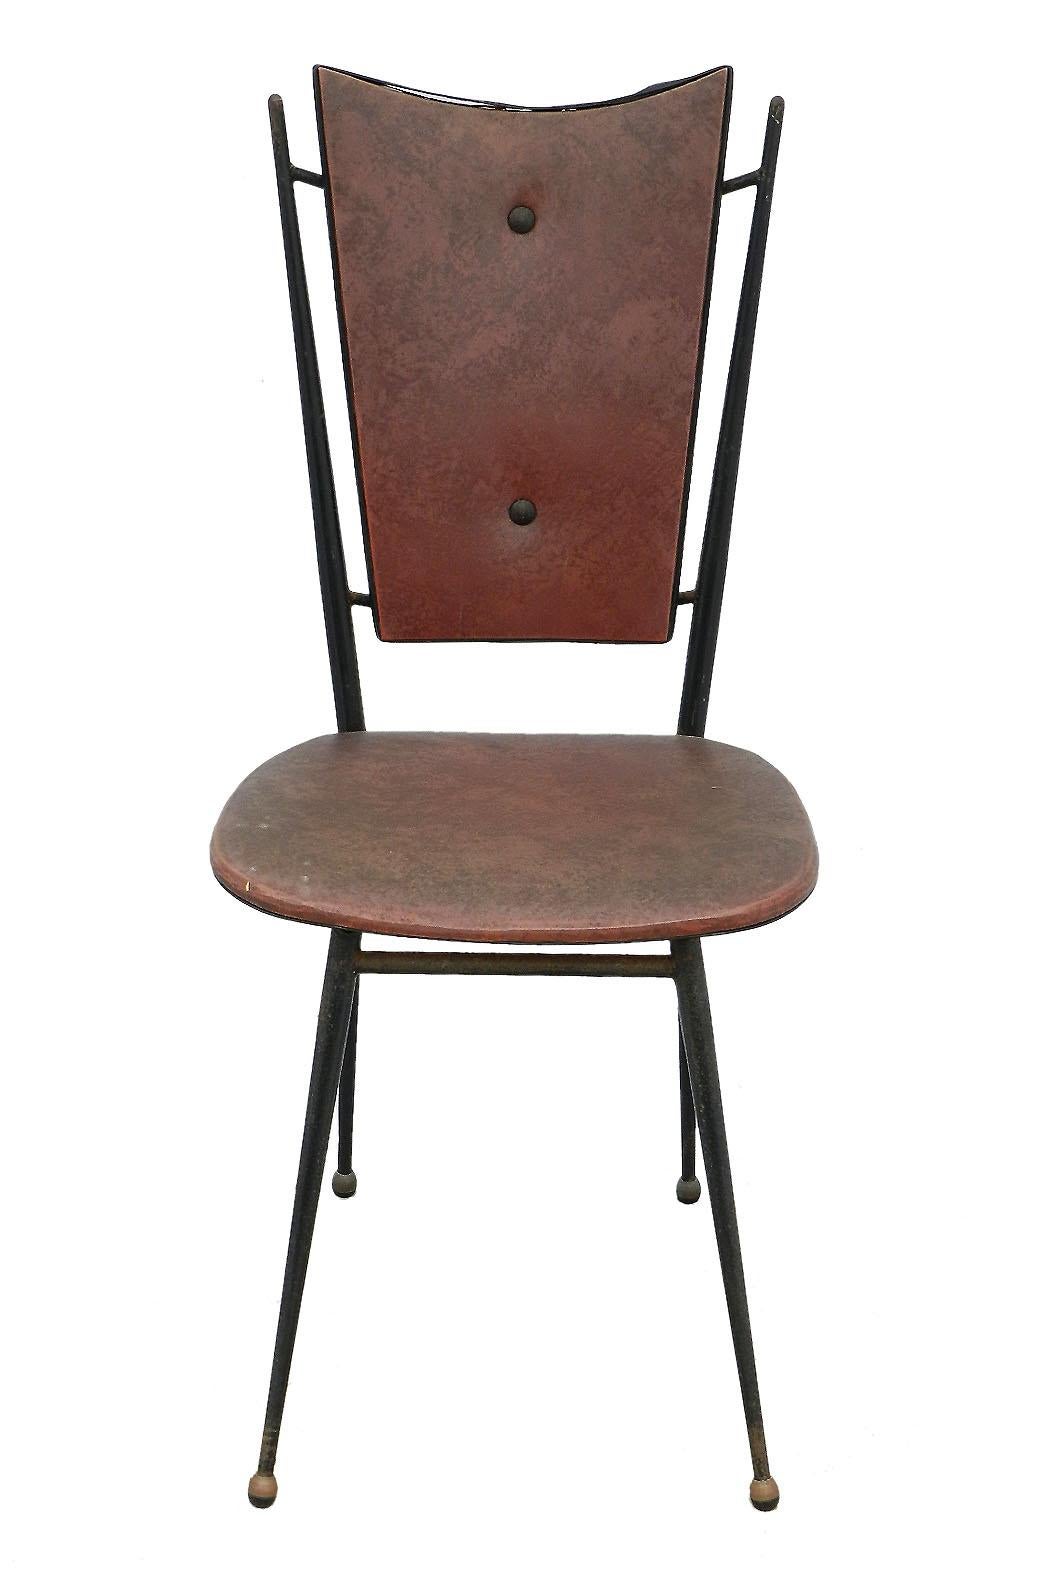 Six Midcentury Dining Chairs French to Restore Recover and Customize 1